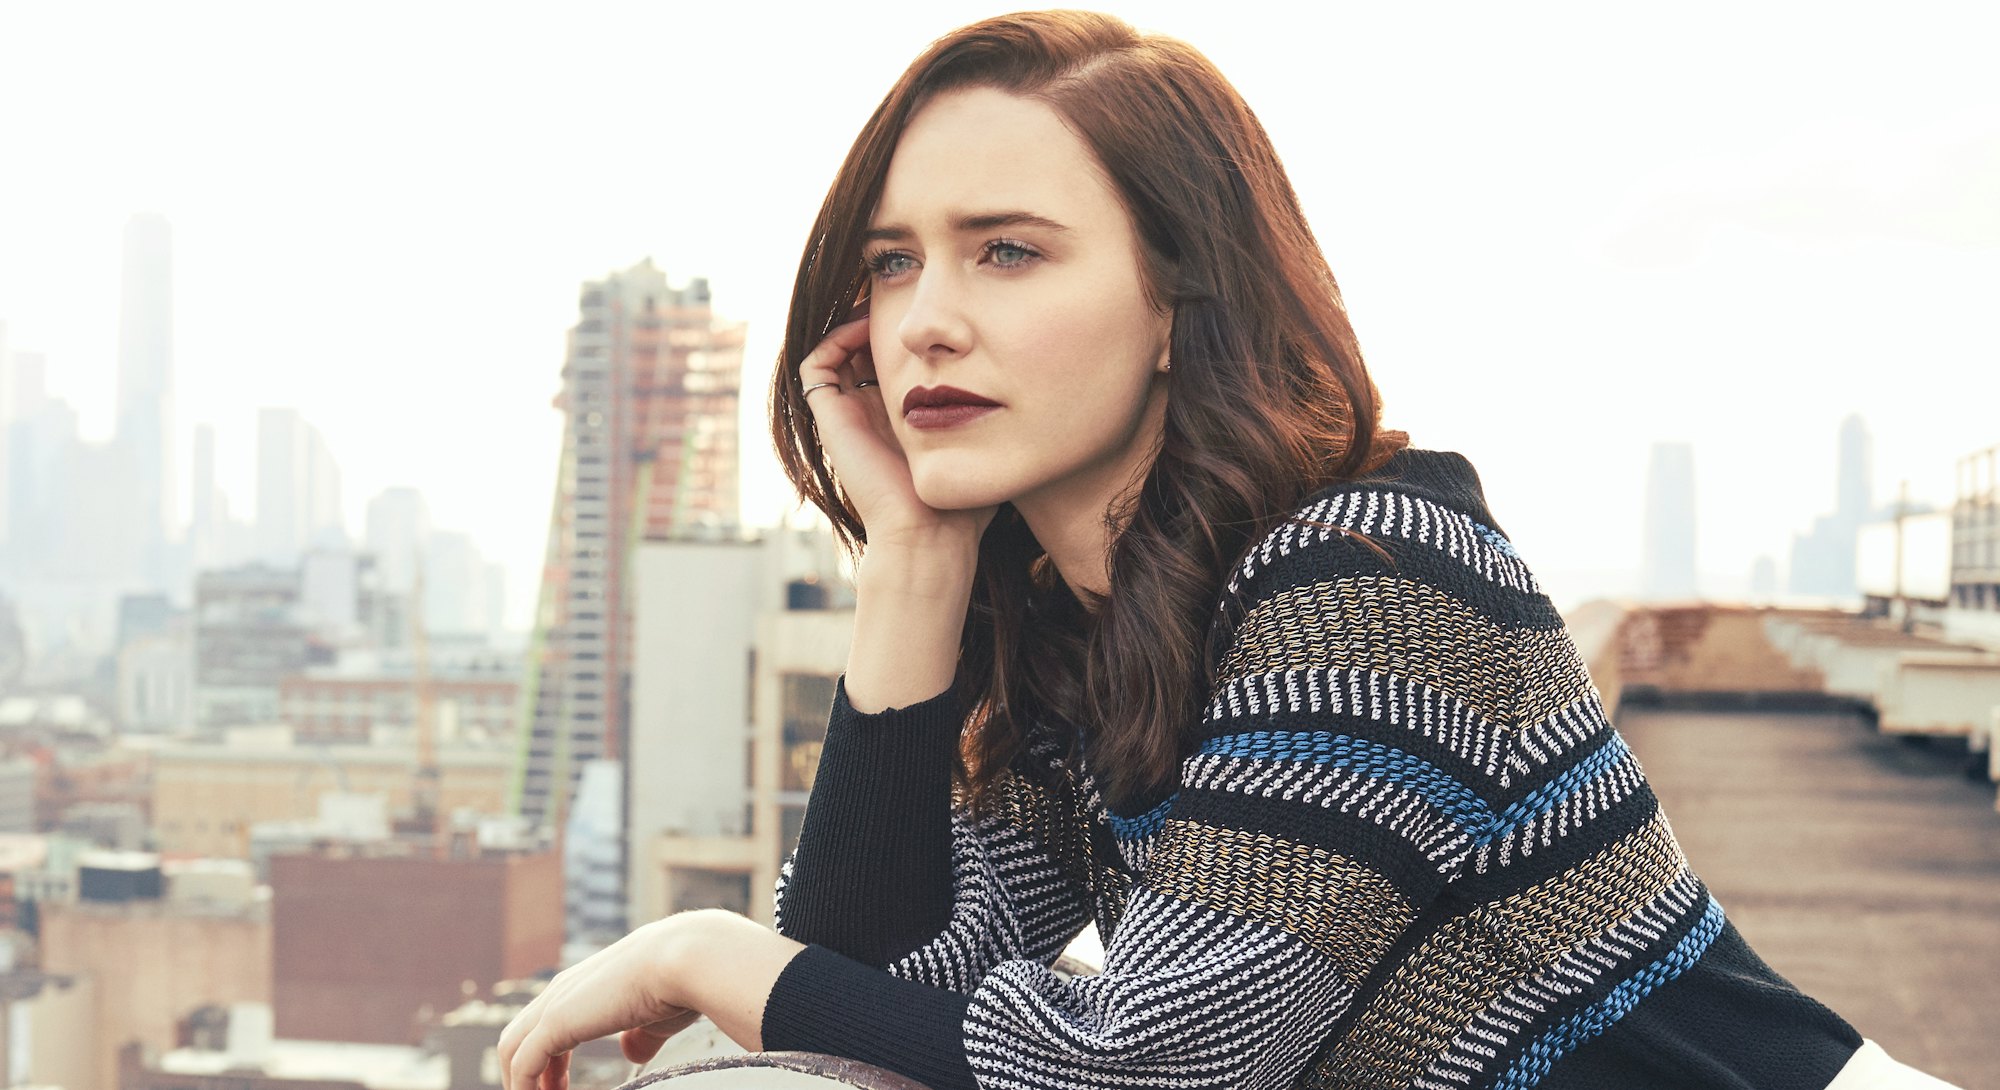 Rachel Brosnahan looking at the city from a rooftop